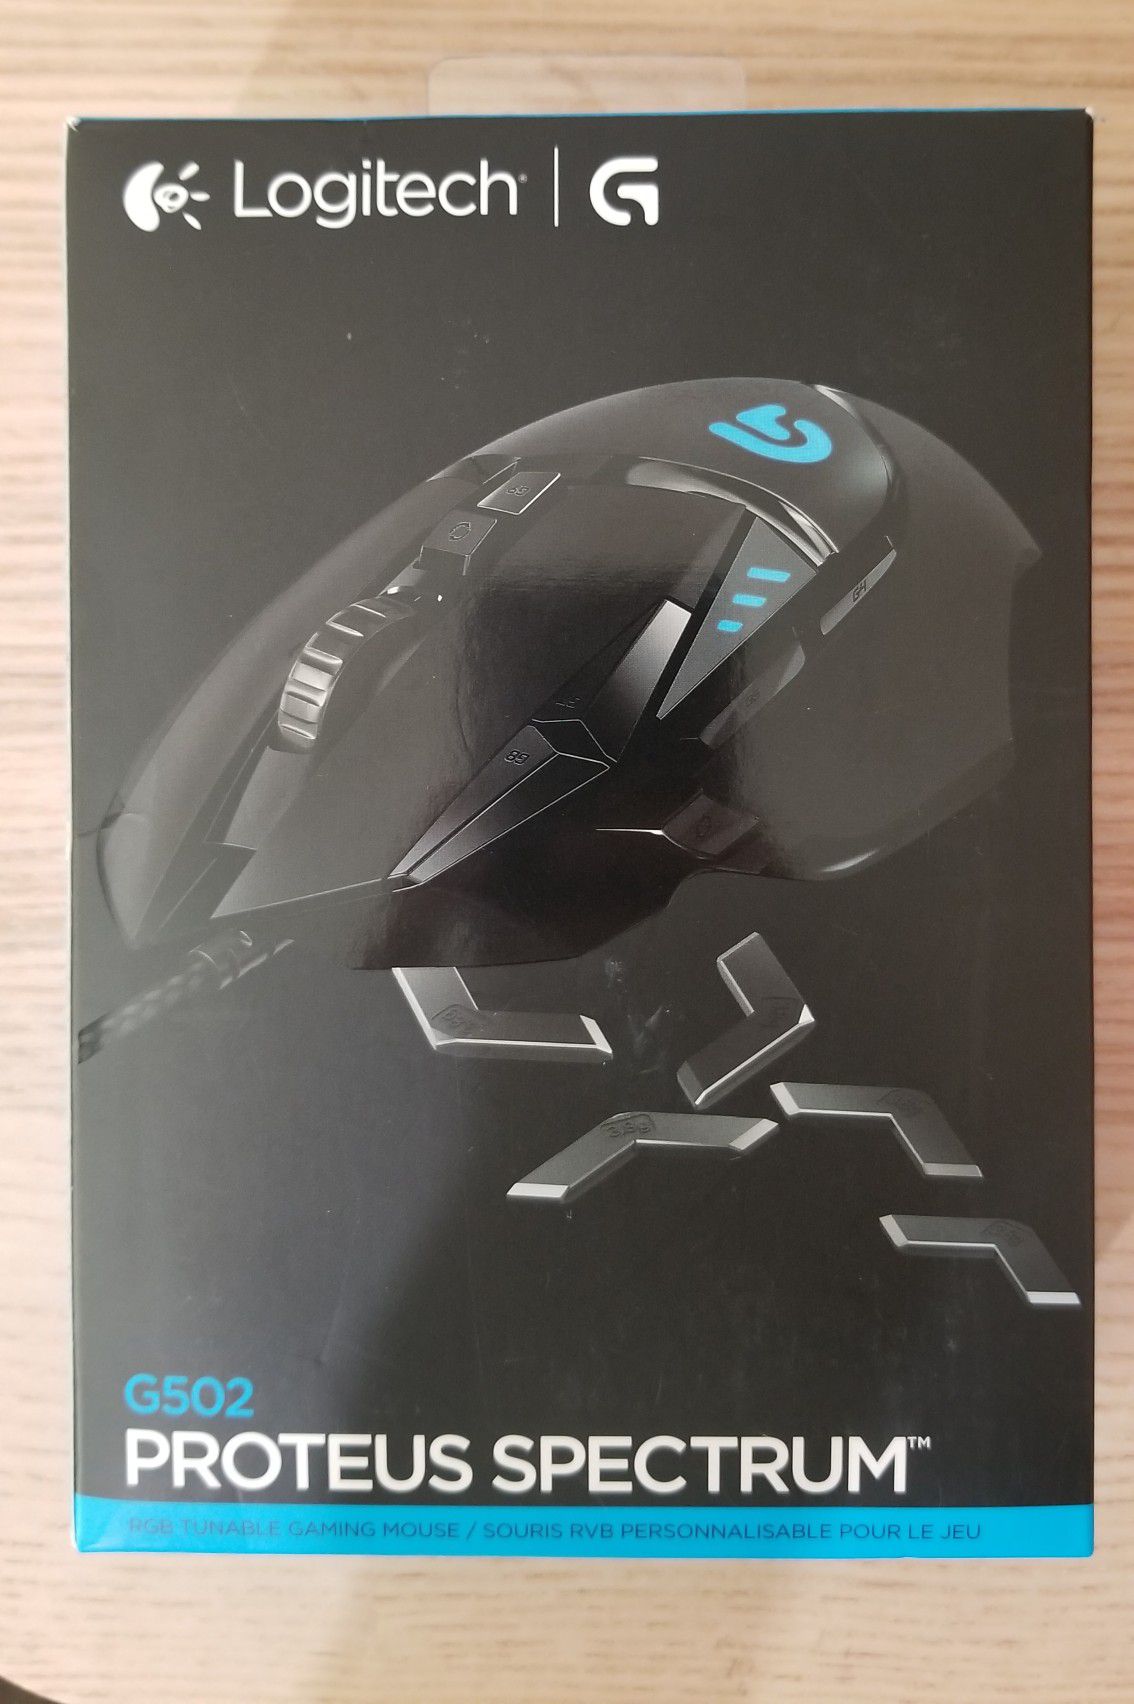 G502 Logitech gaming mouse